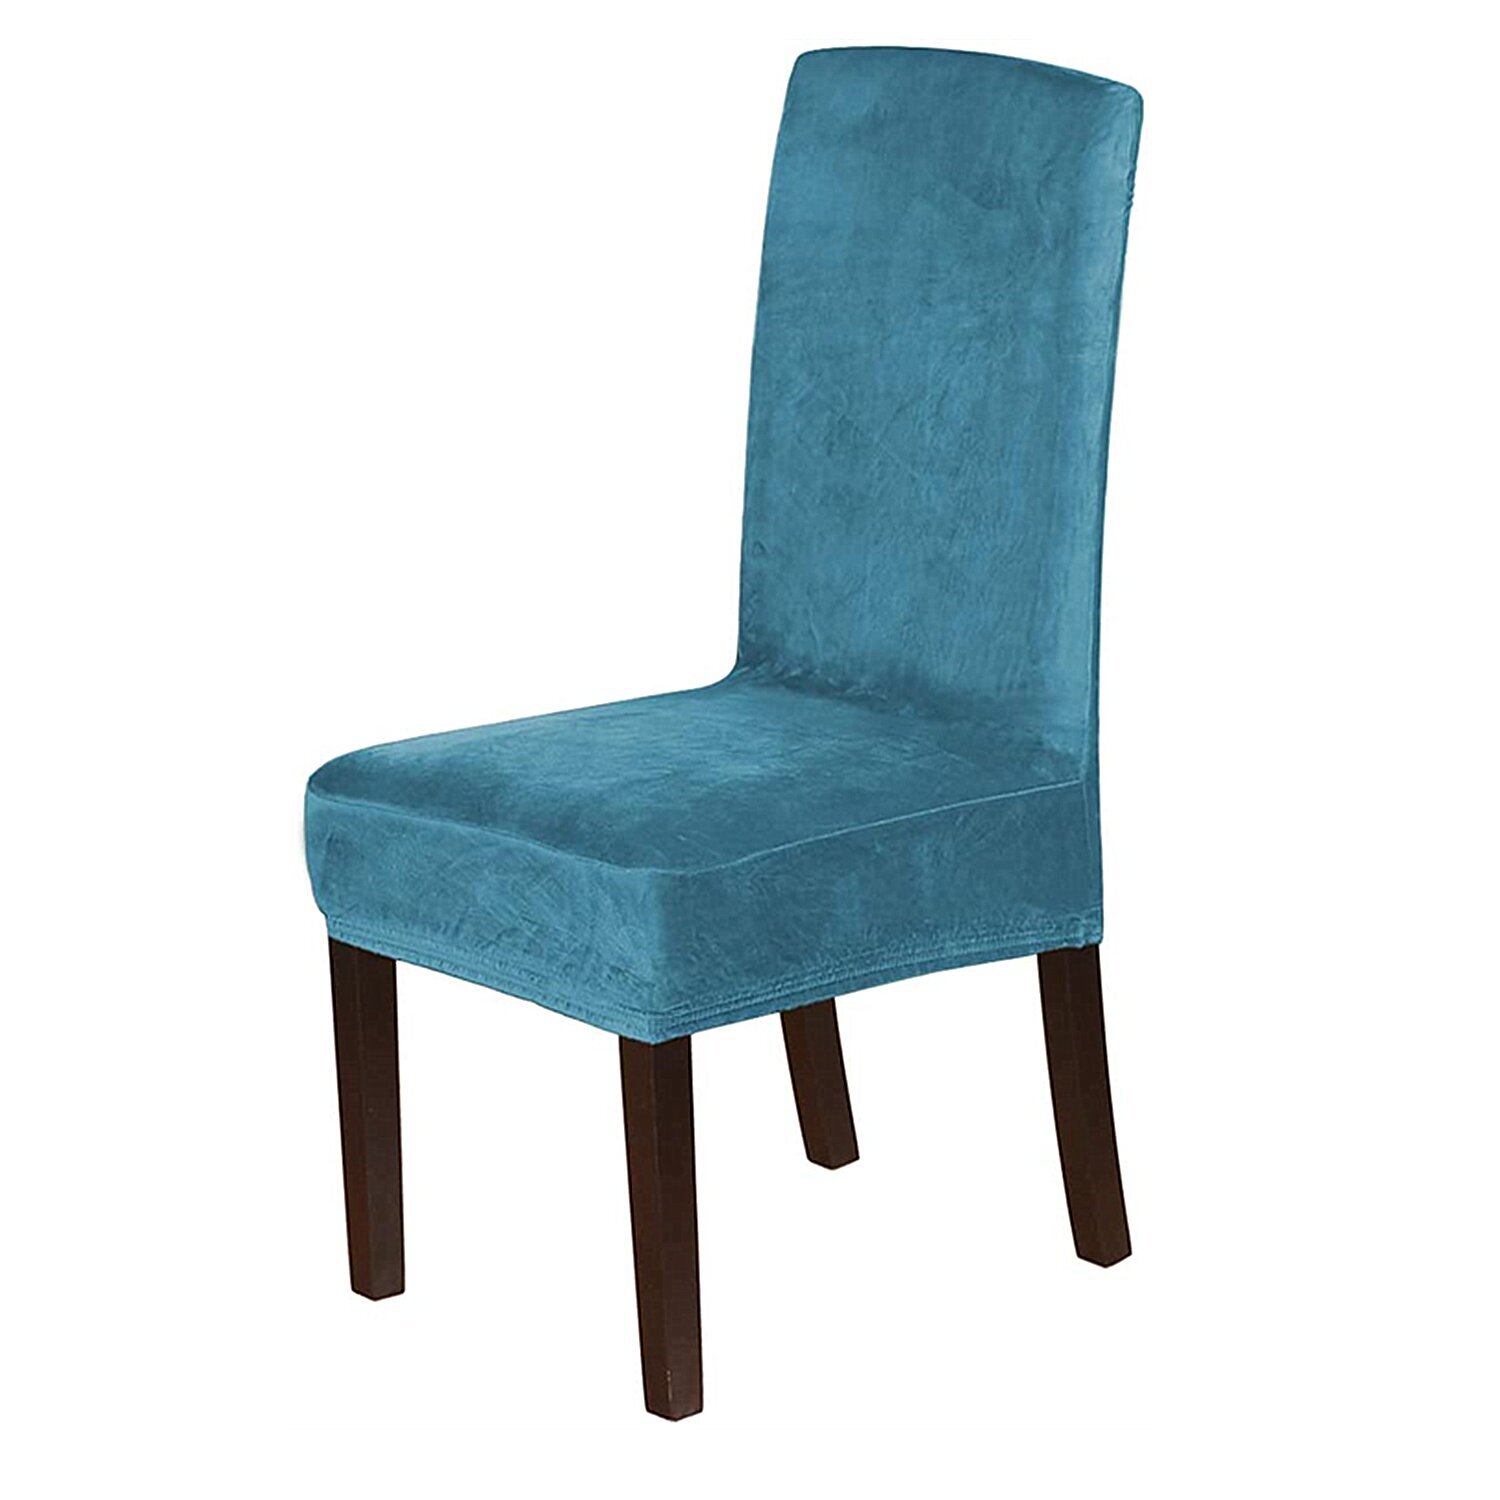 Luxury dining chair covers